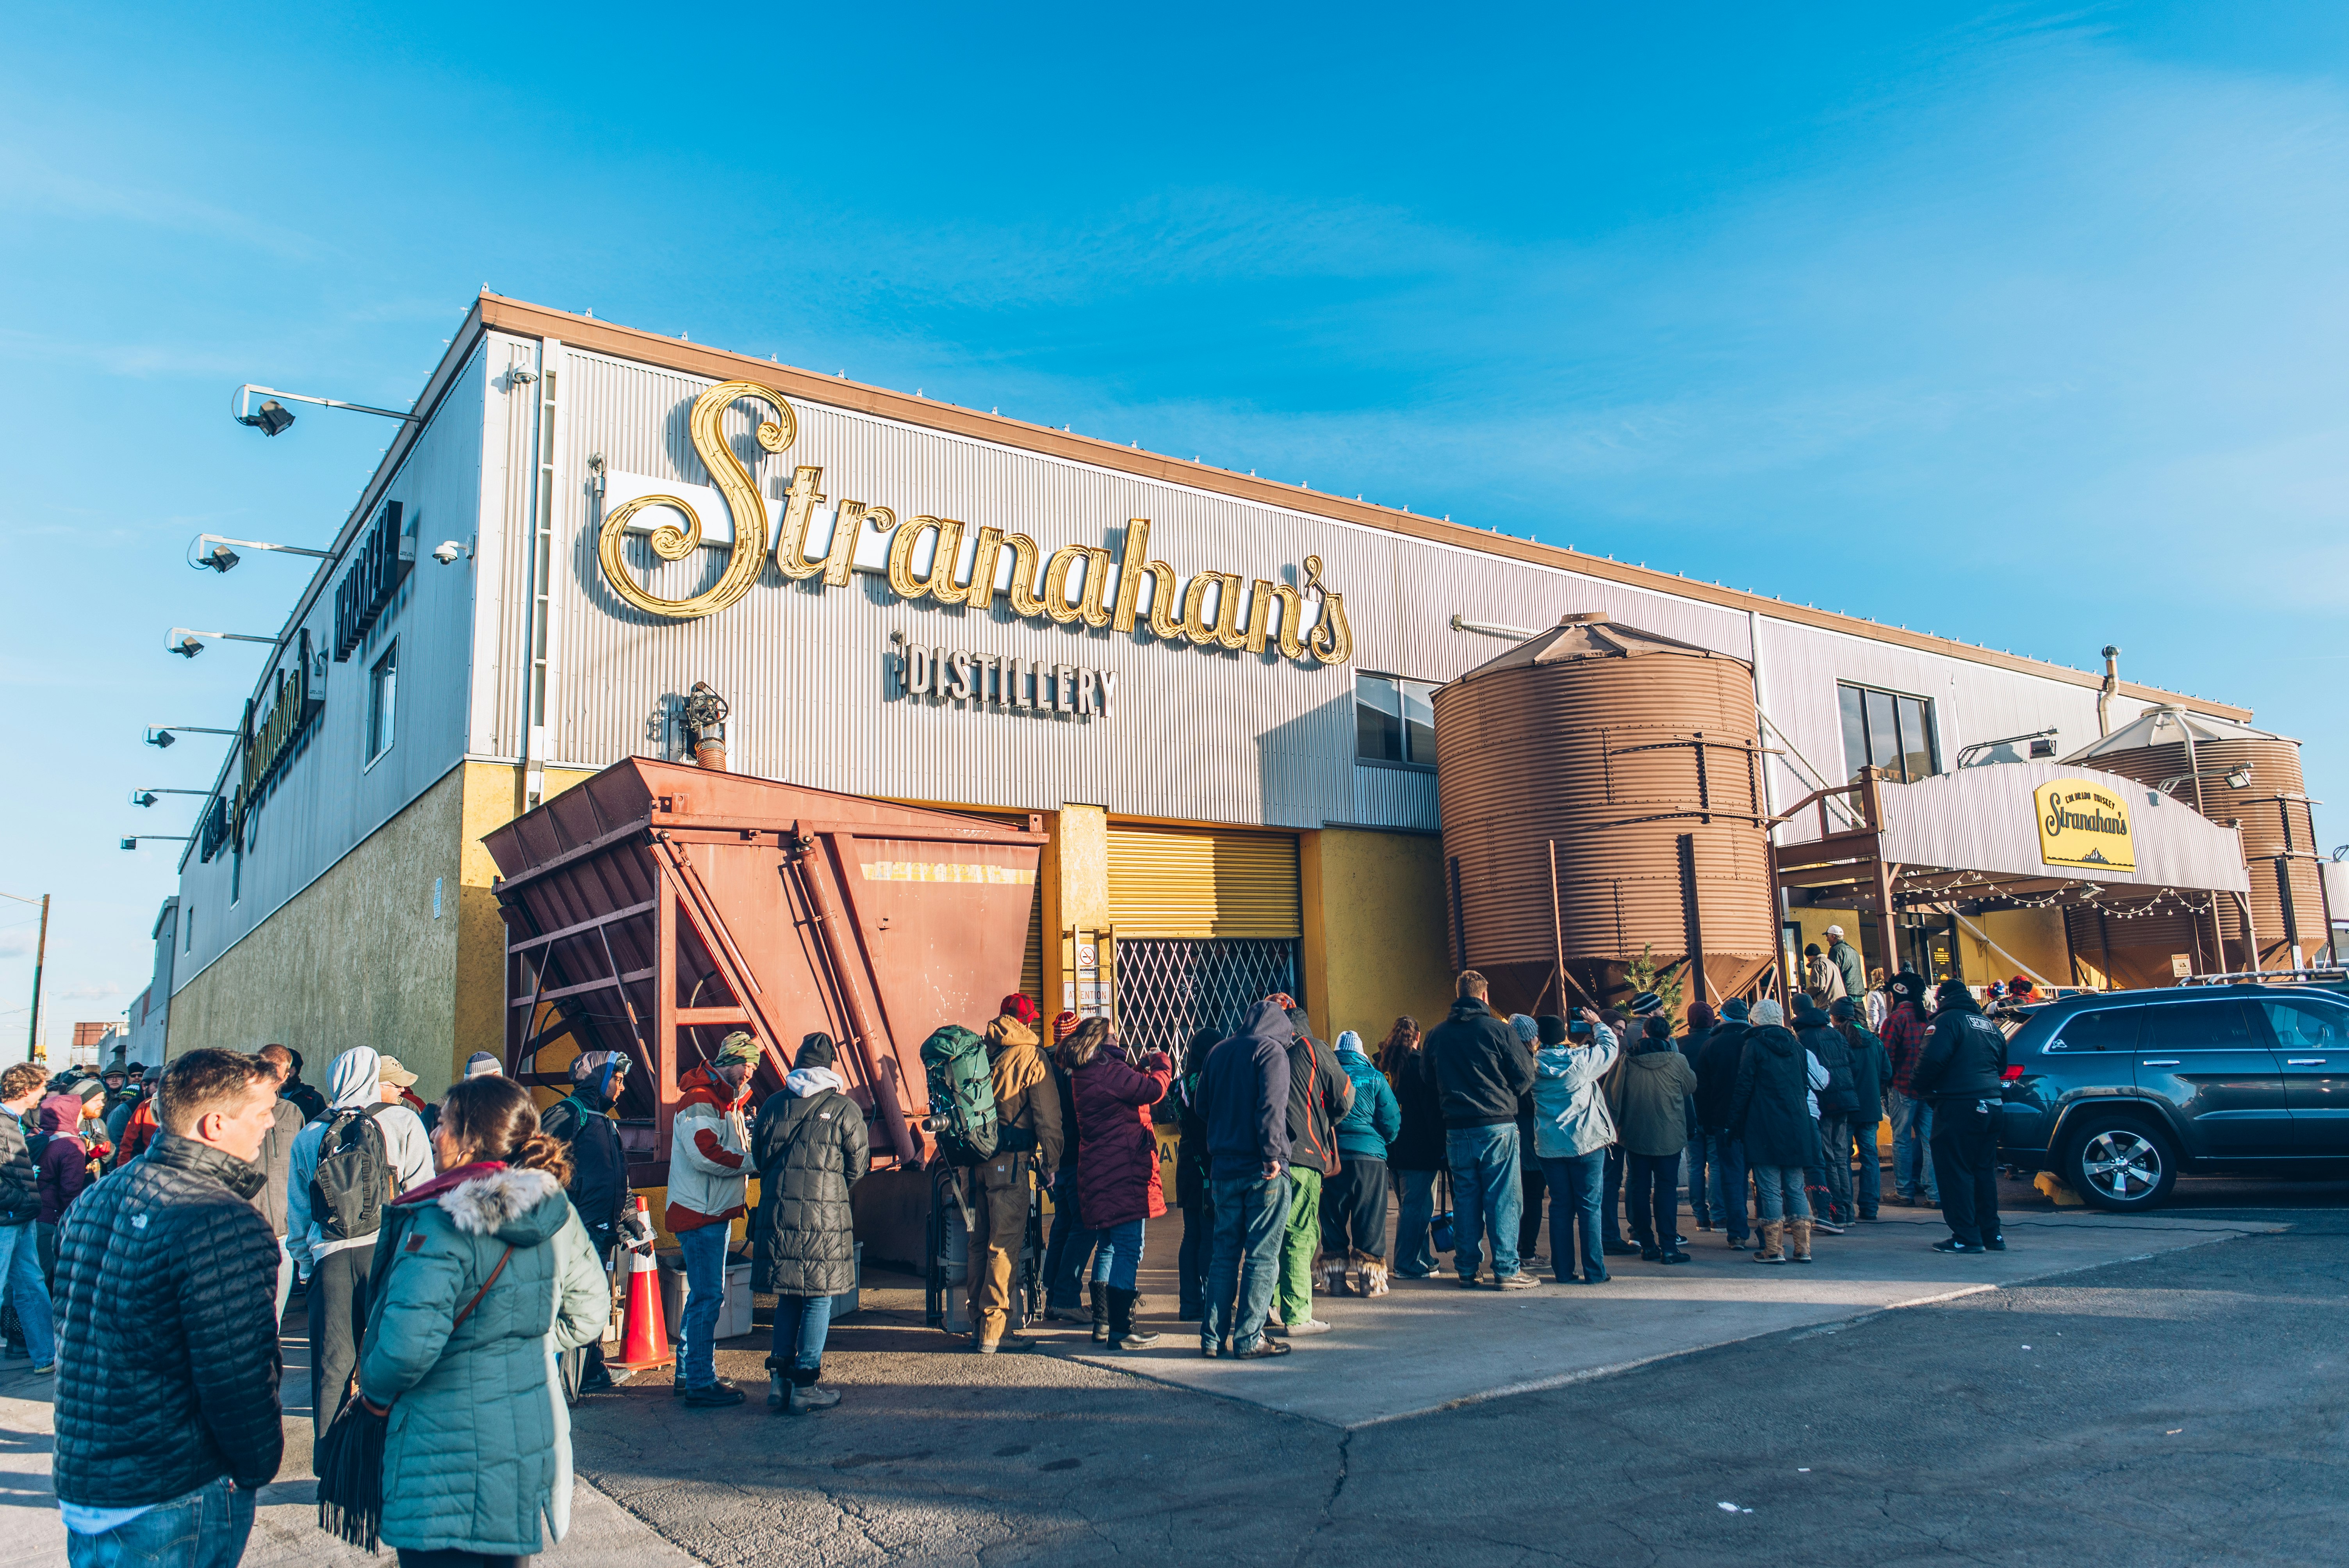 A long line of people wraps around Stranahan's distillery in Denver 